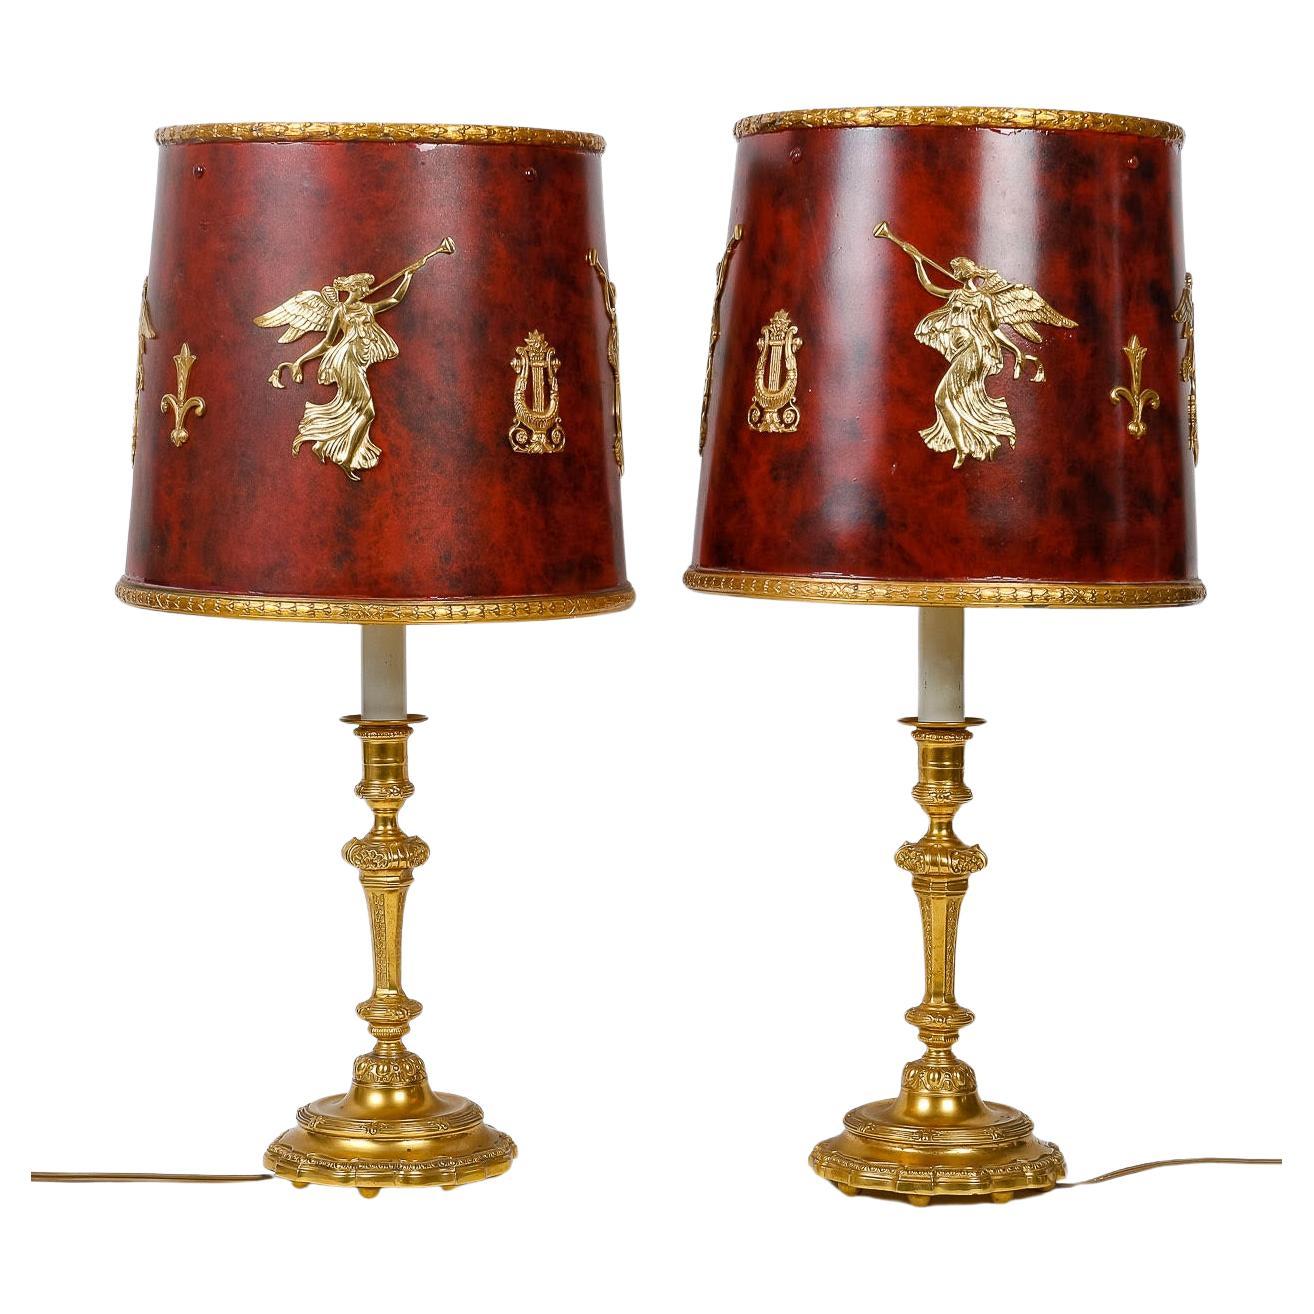 Pair of Bronze Table Lamps, 20th Century.